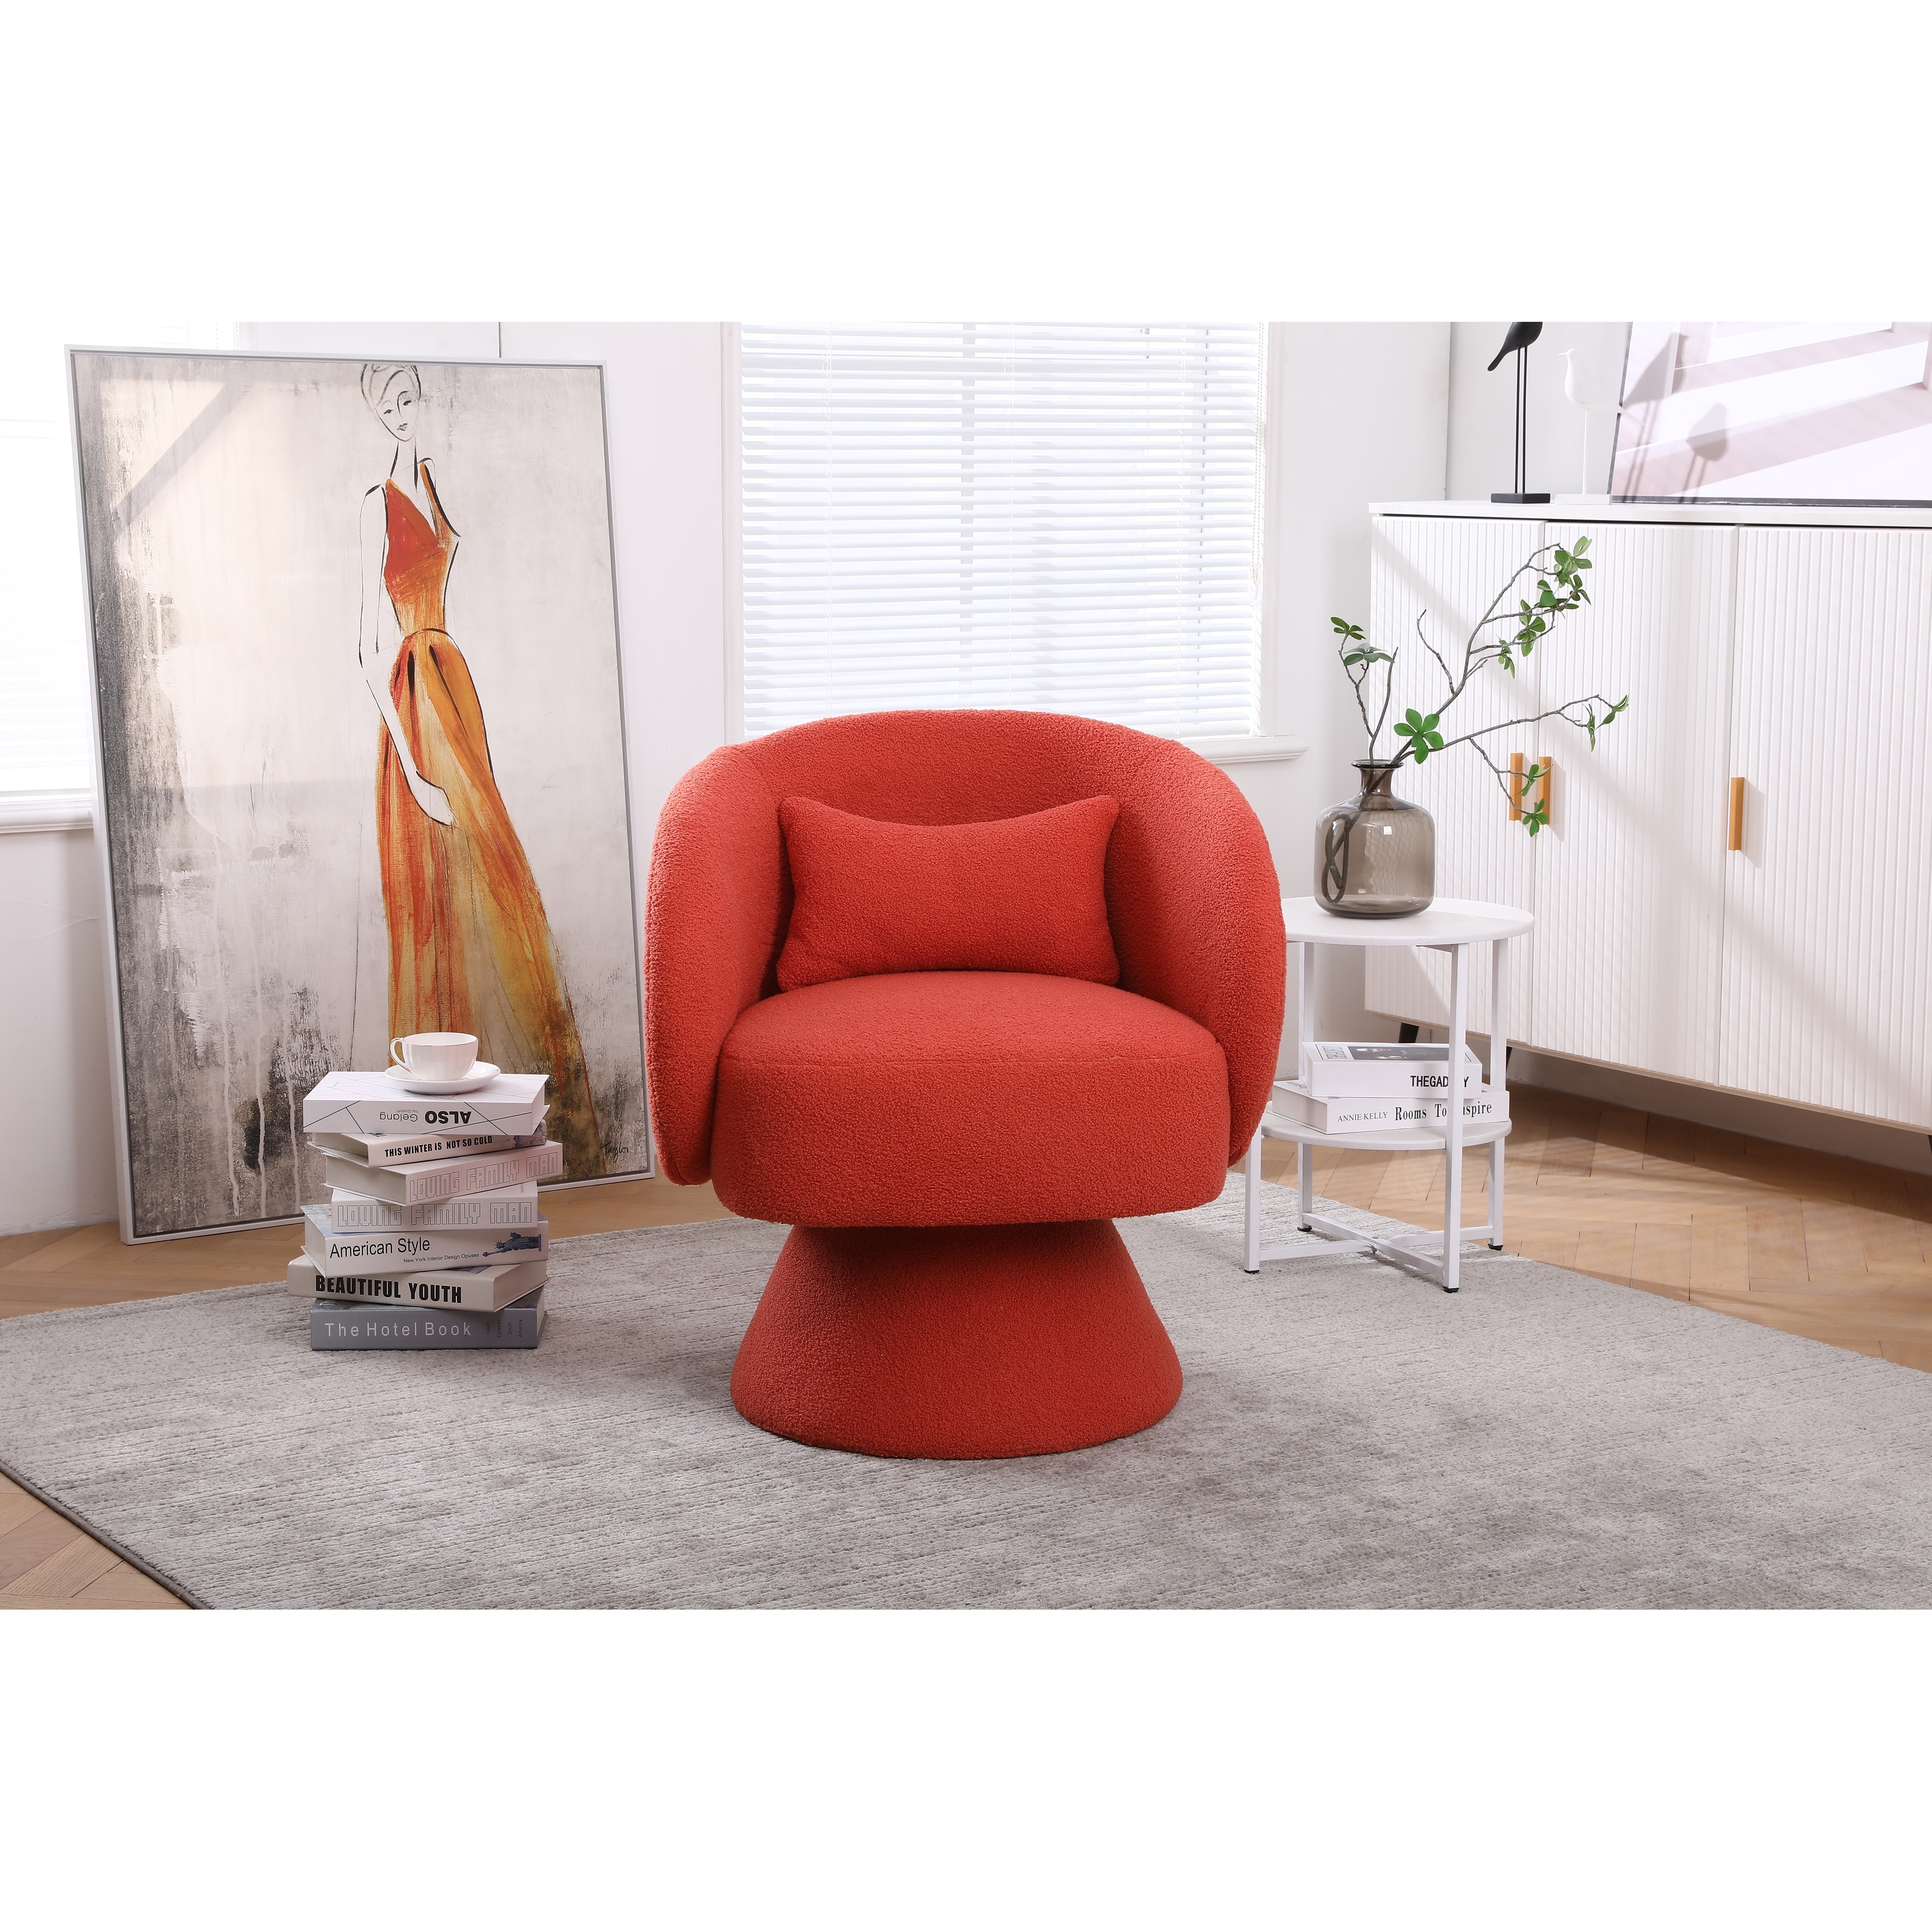 https://ak1.ostkcdn.com/images/products/is/images/direct/c4727fafc3b06ae8f328d7d4caf092a092546c31/Modern-Accent-Chair-Swivel-Armchair%2C-Round-Fabric-Barrel-Chairs-Single-Sofa-Lounge-Chair-with-Small-Pillow-for-Living-Room.jpg